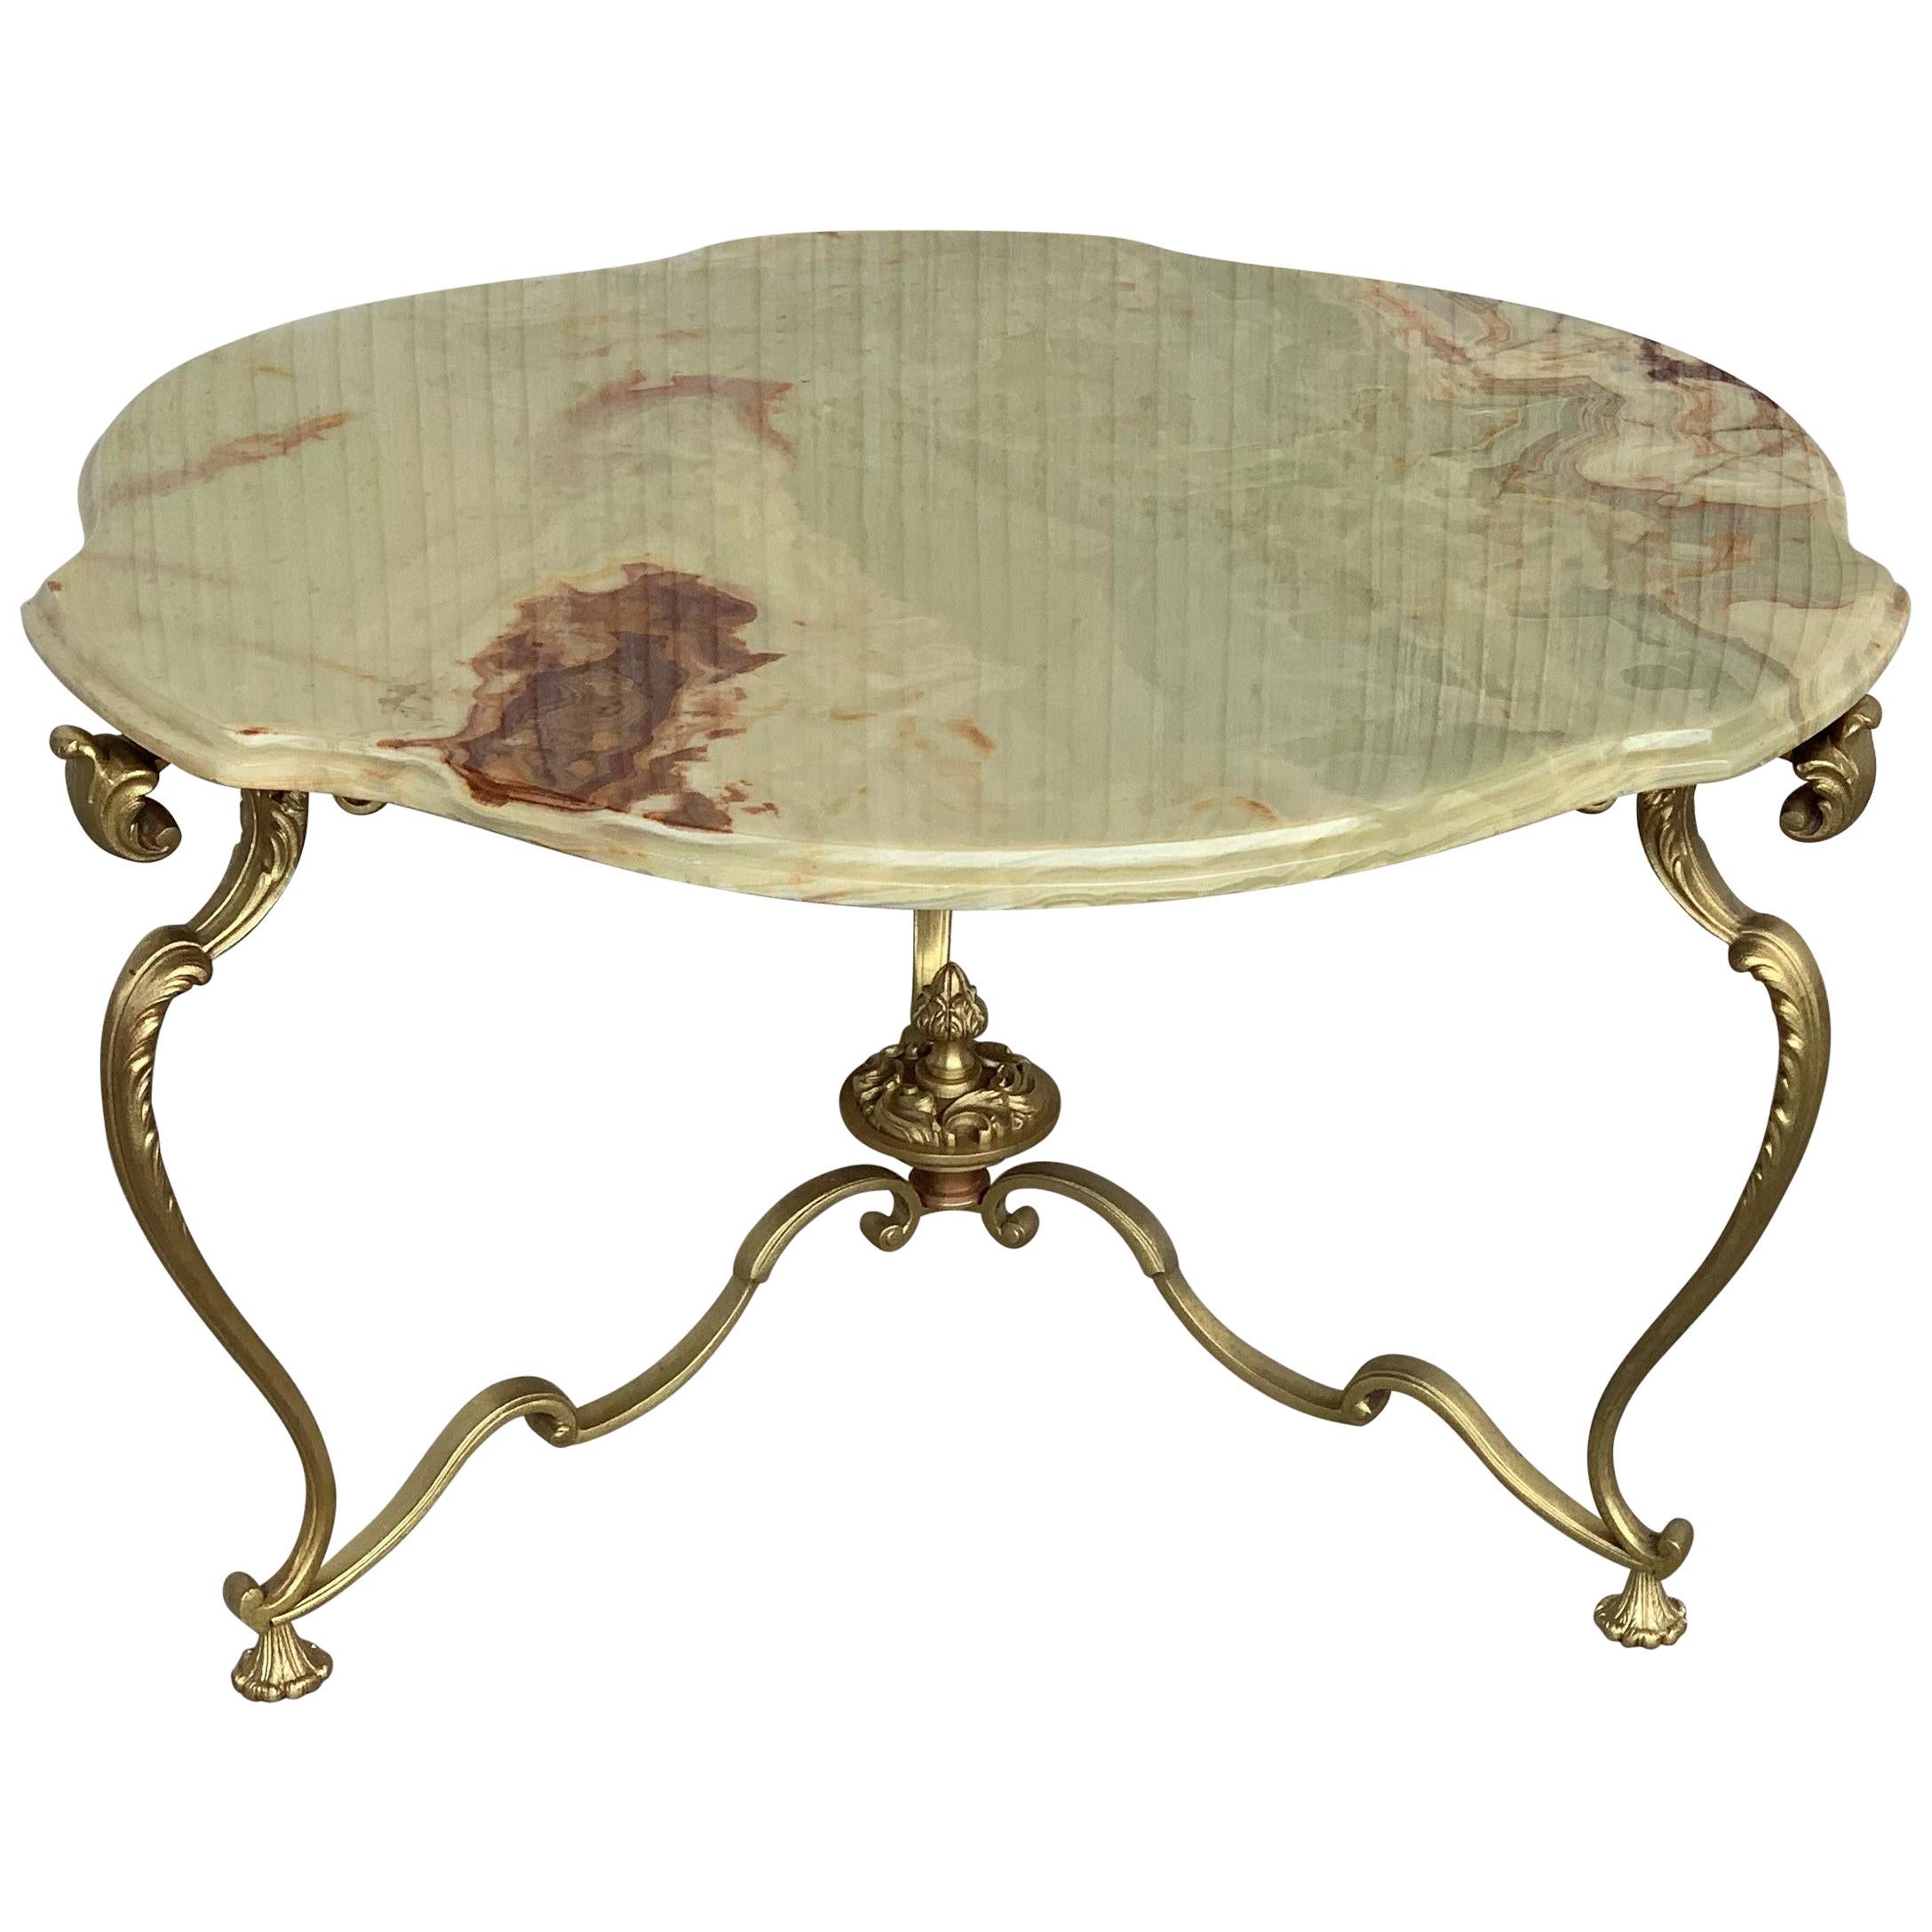 19th Green Onyx Clover Form Top and Bronze Legs Coffee Table